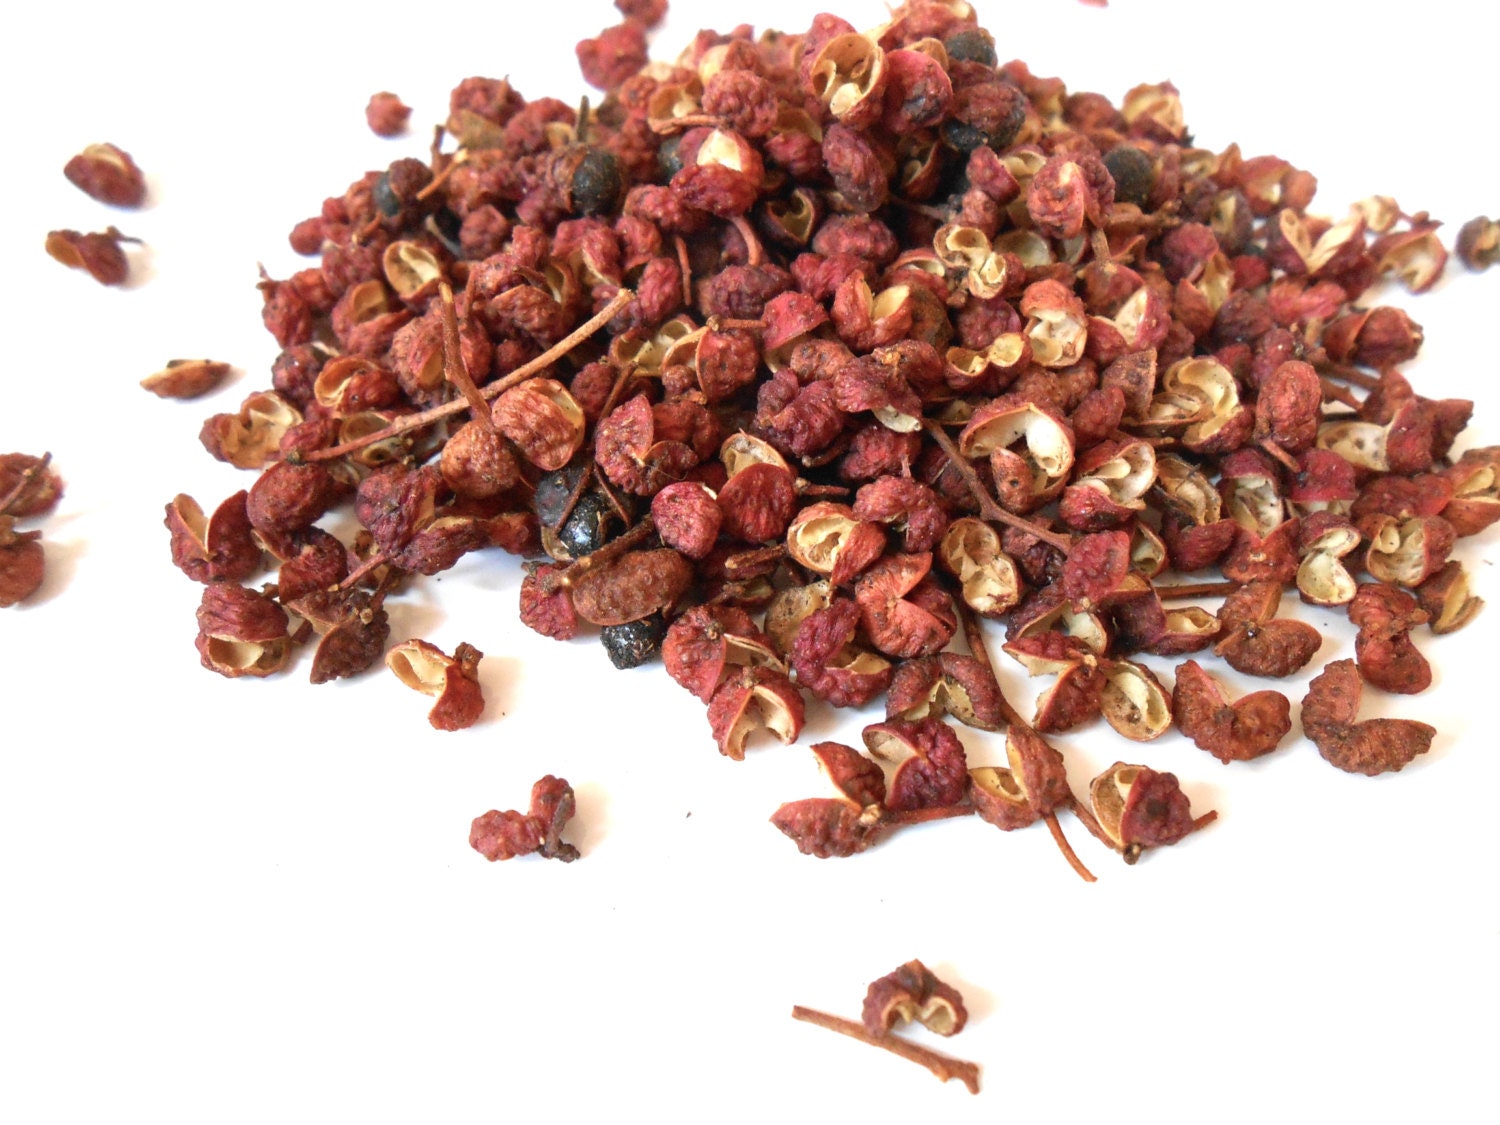 Whole SZECHUAN PEPPER Organic Tasty and Spicy Asian